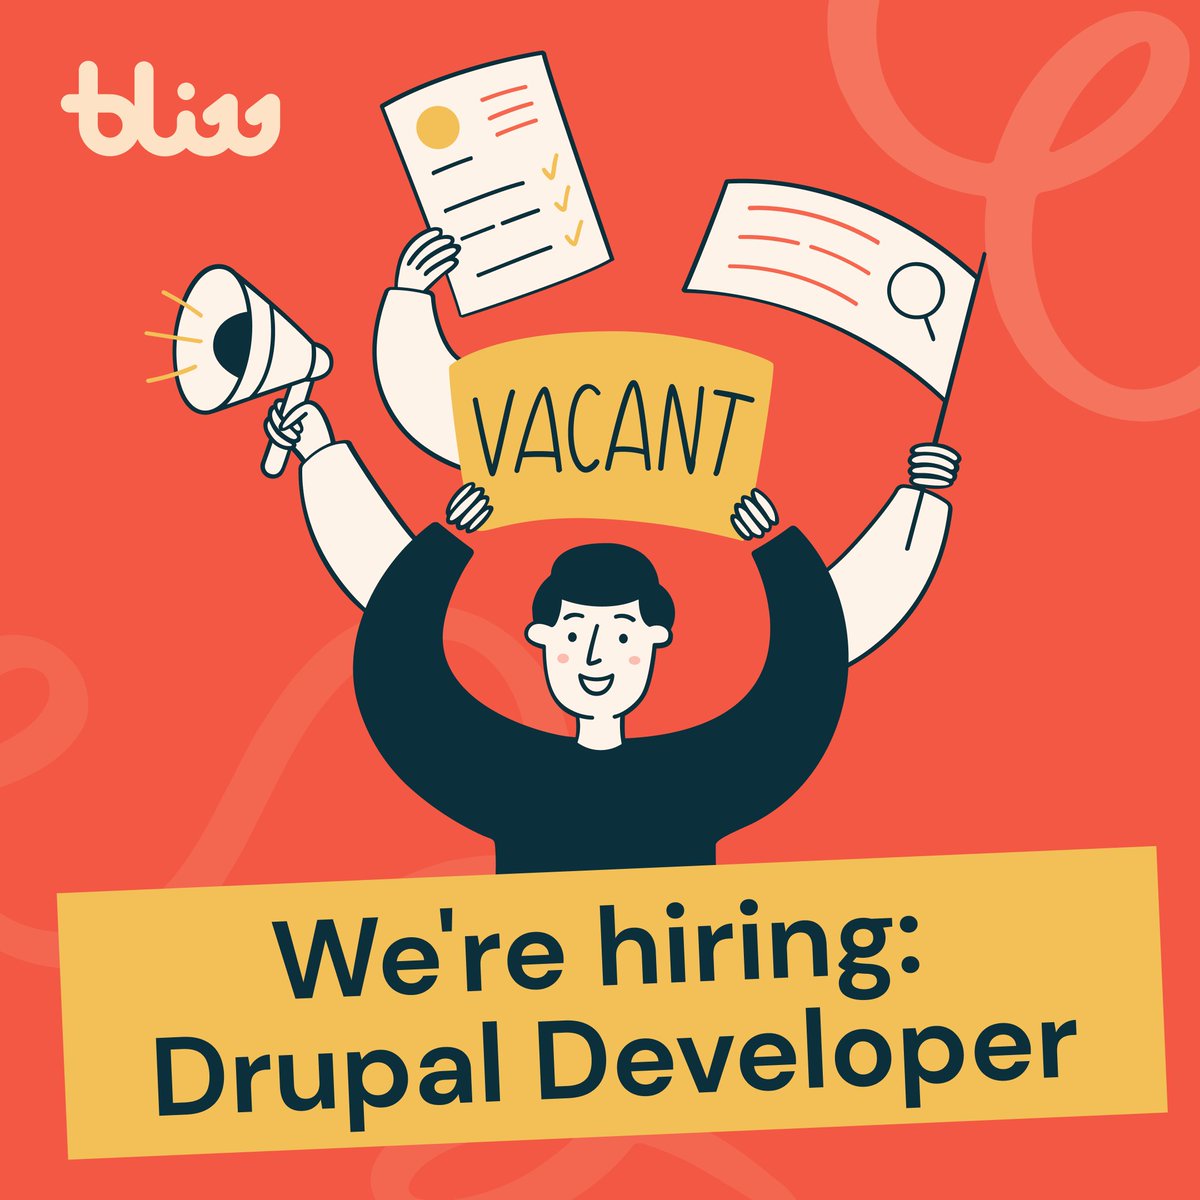 Are you a Drupal developer passionate about making a difference? Bliss is seeking an expert like you to join our purpose-driven digital agency. 🌟

Find out more & apply here 👉 

charityjob.co.uk/jobs/bliss/dru… 

#DrupalDeveloper #WebDevJobs #Hiring #BCorpJobs #WebsiteDeveloper